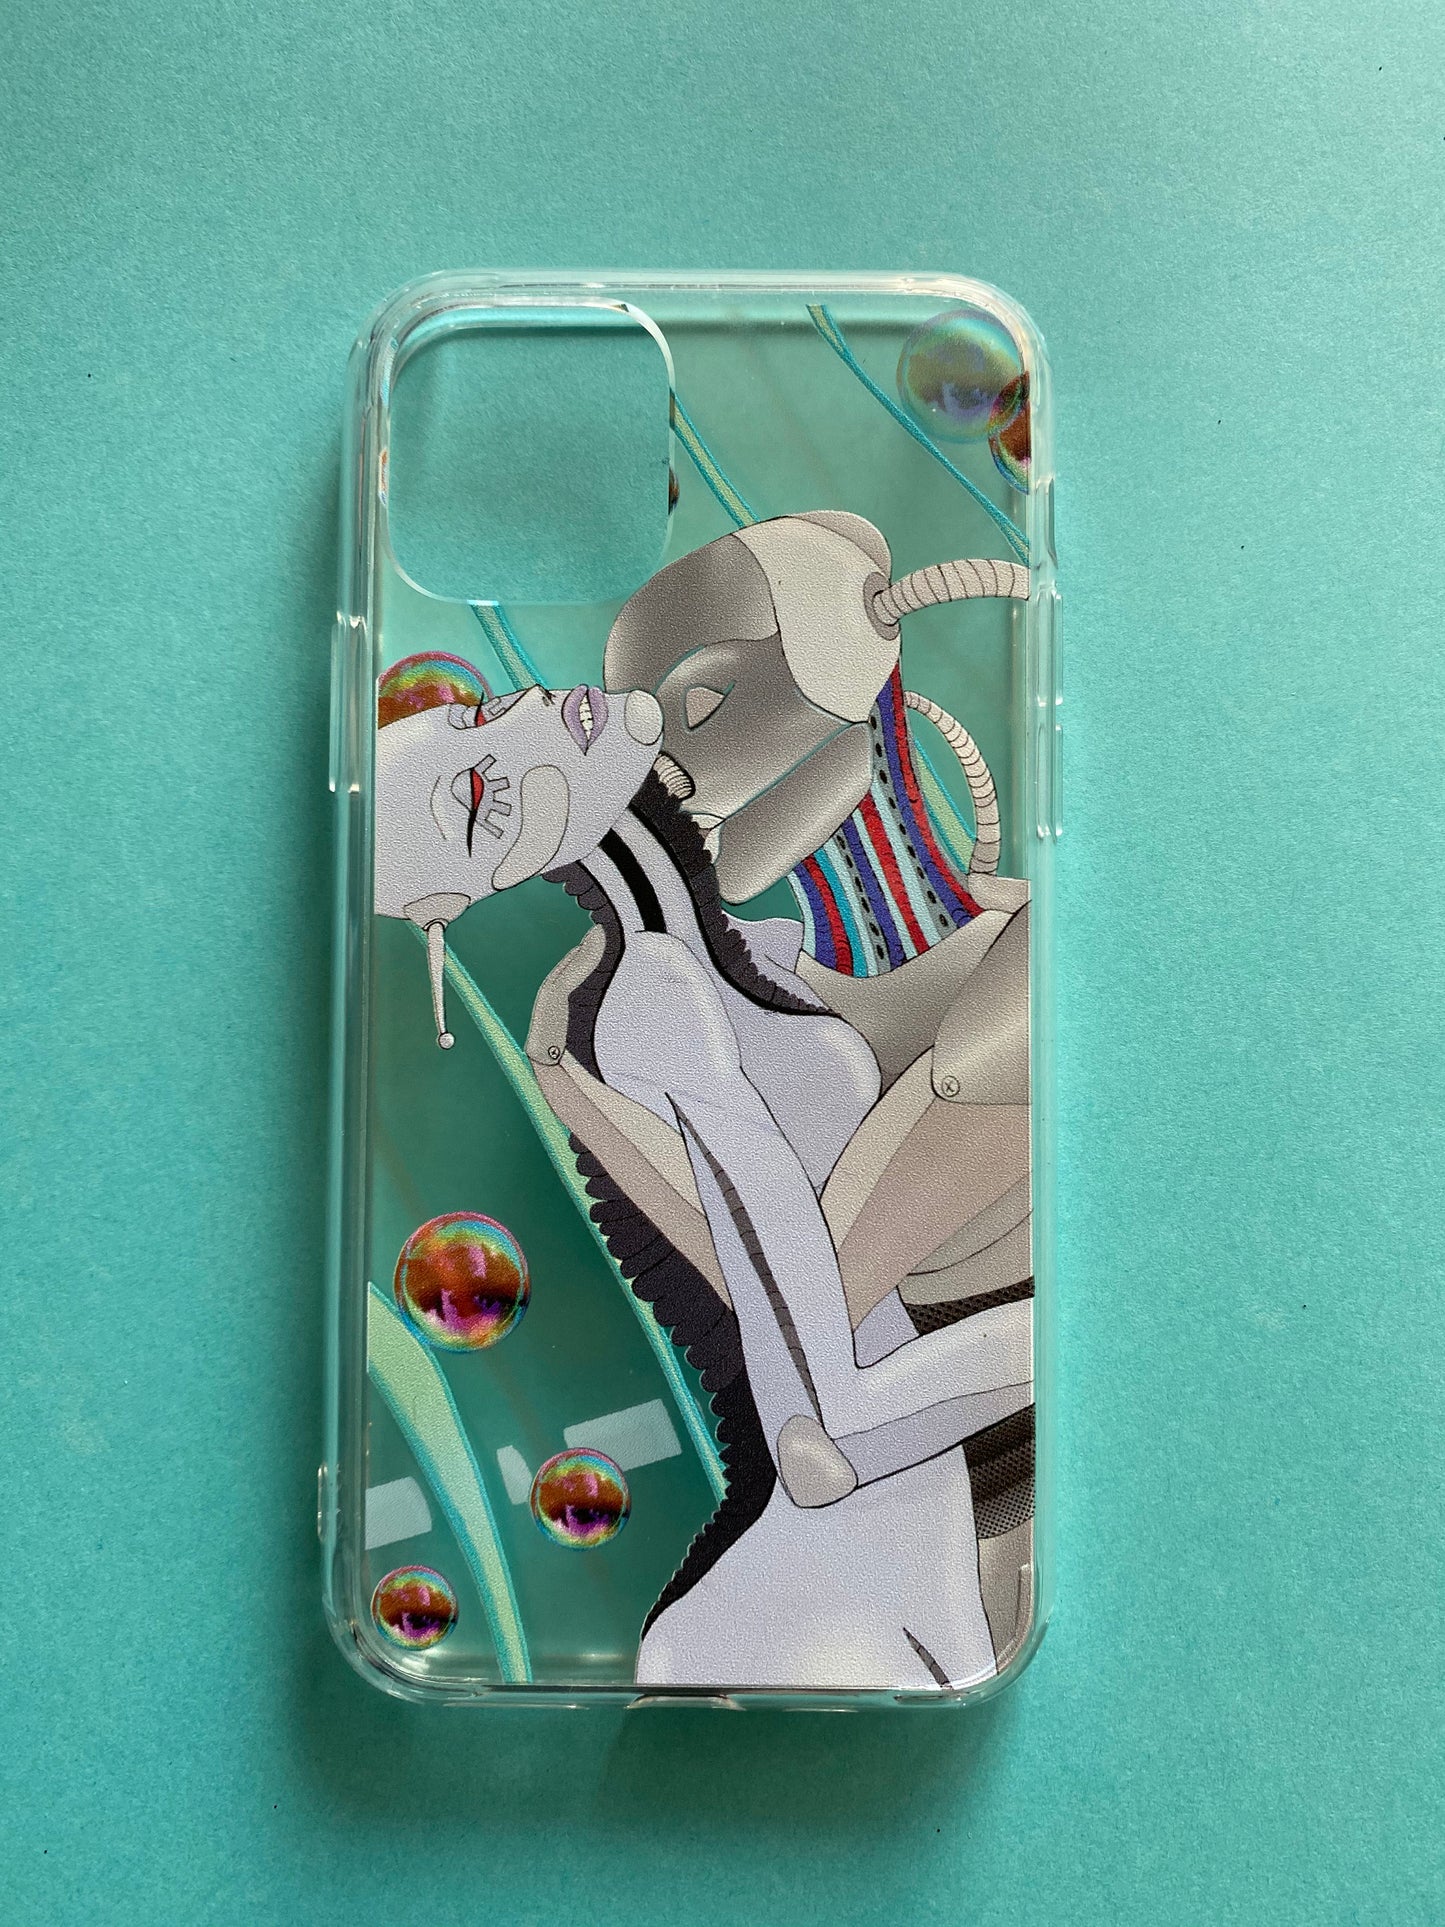 The Lovers Phone Case - Available in most iPhones!